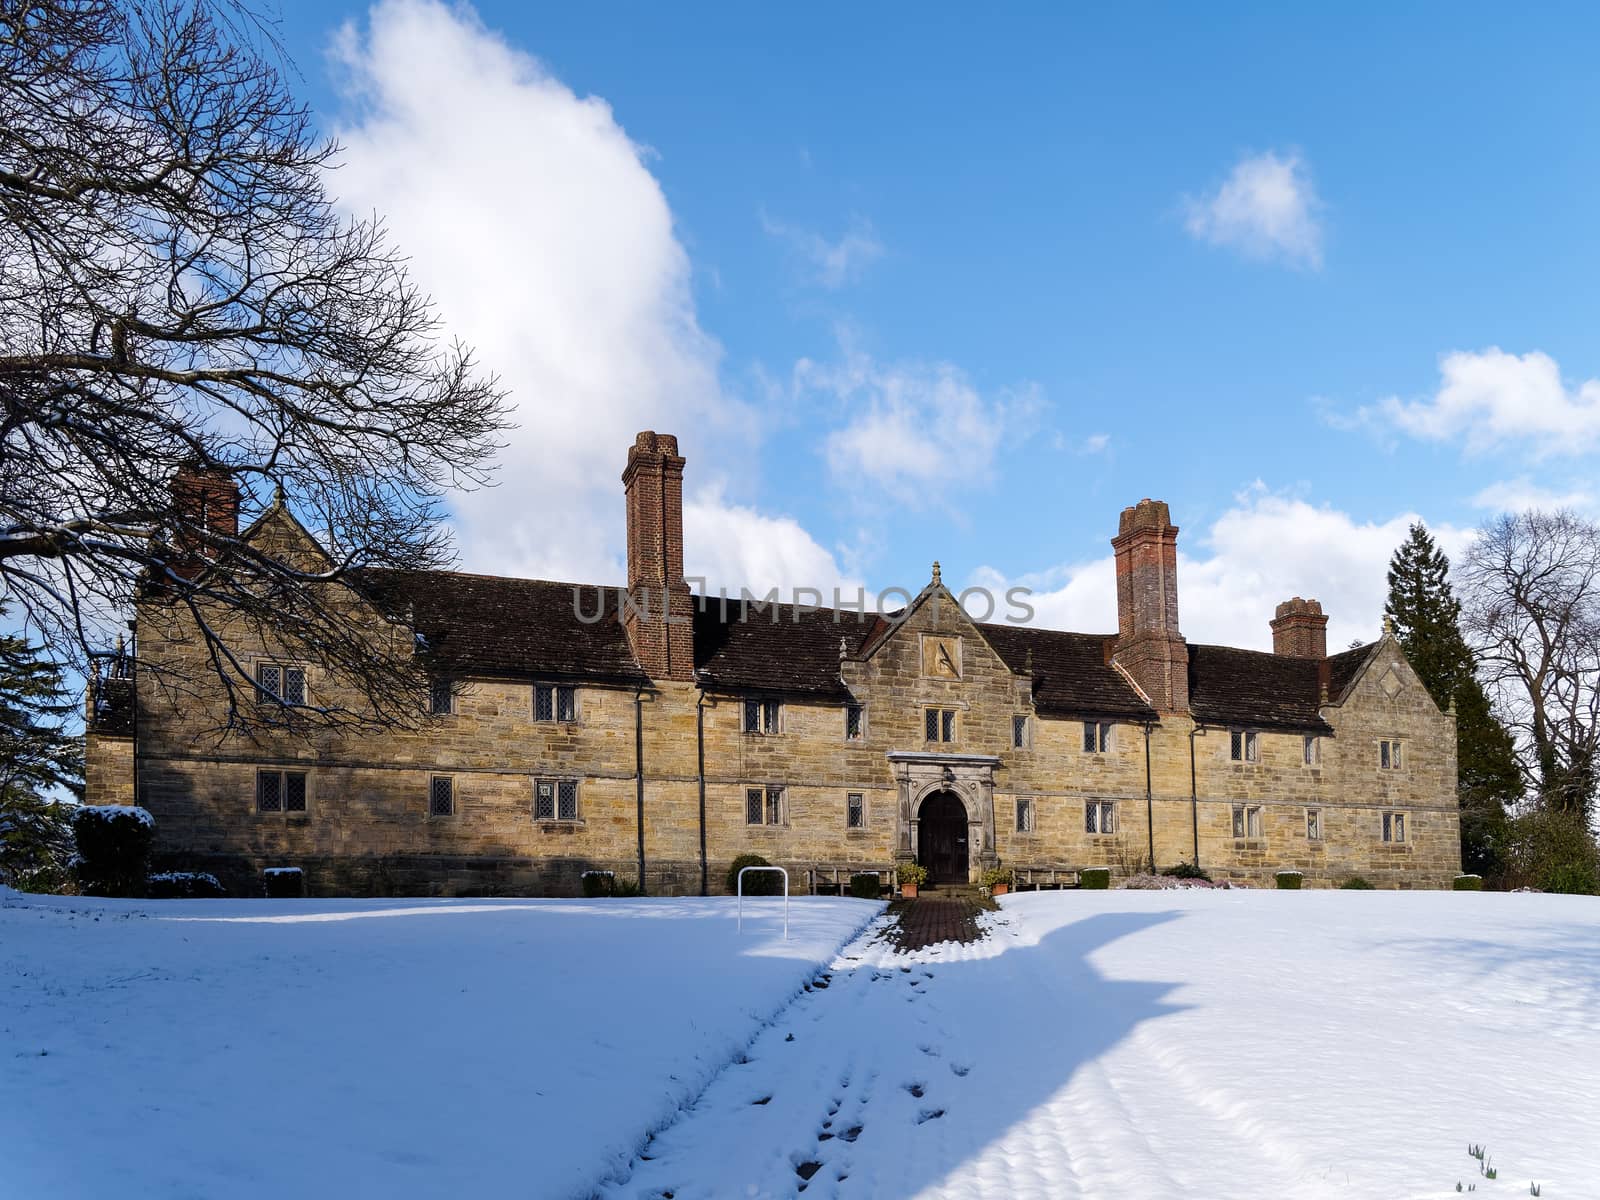 EAST GRINSTEAD, WEST SUSSEX/UK - FEBRUARY 27 : Sackville College by phil_bird